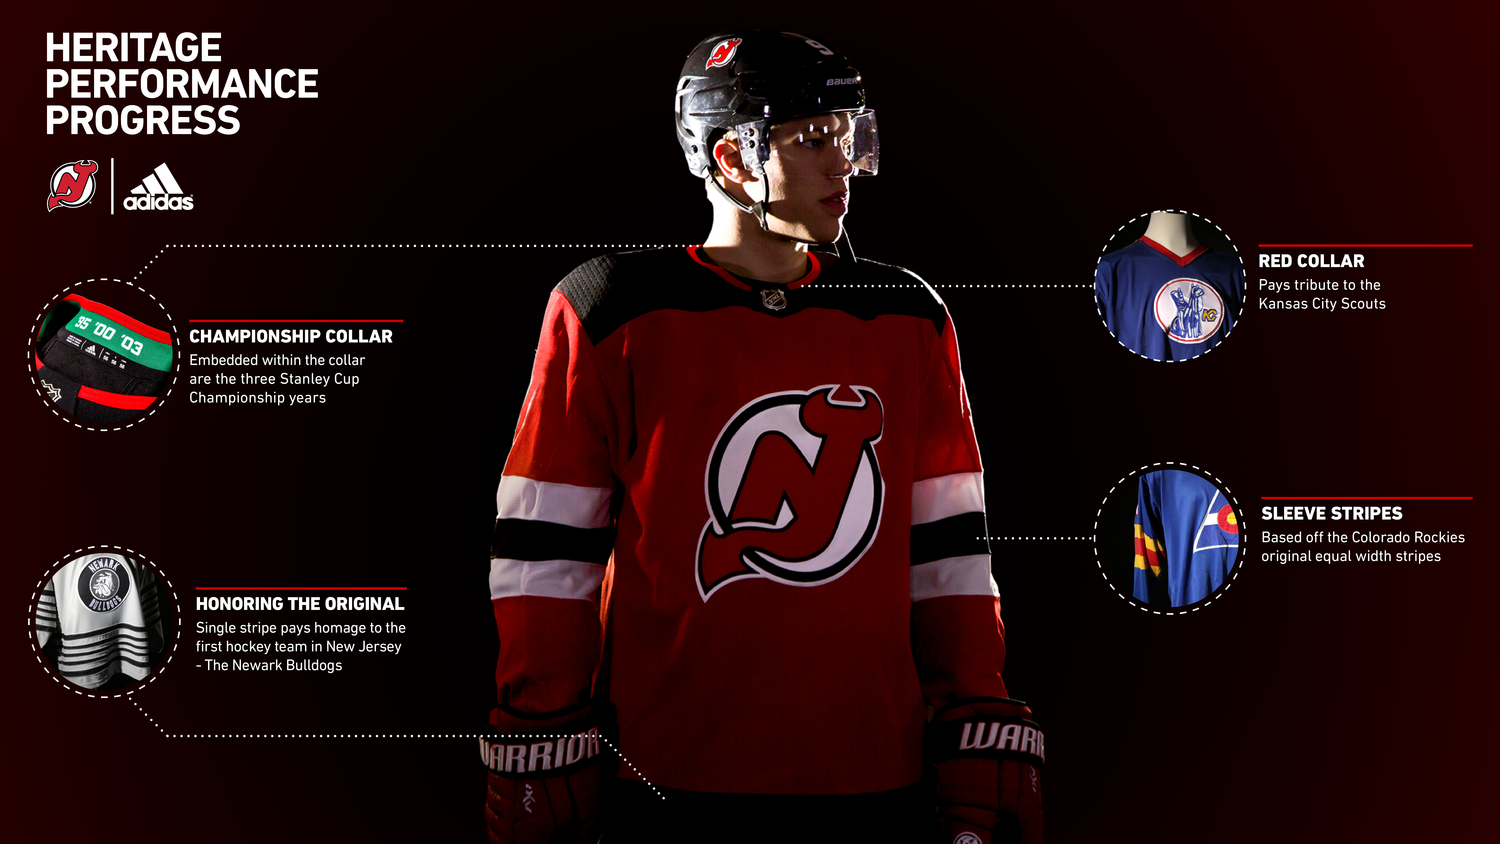 In New Jersey, a new Devils jersey: How Martin Brodeur designed the  franchise's first true alternate sweater - The Athletic